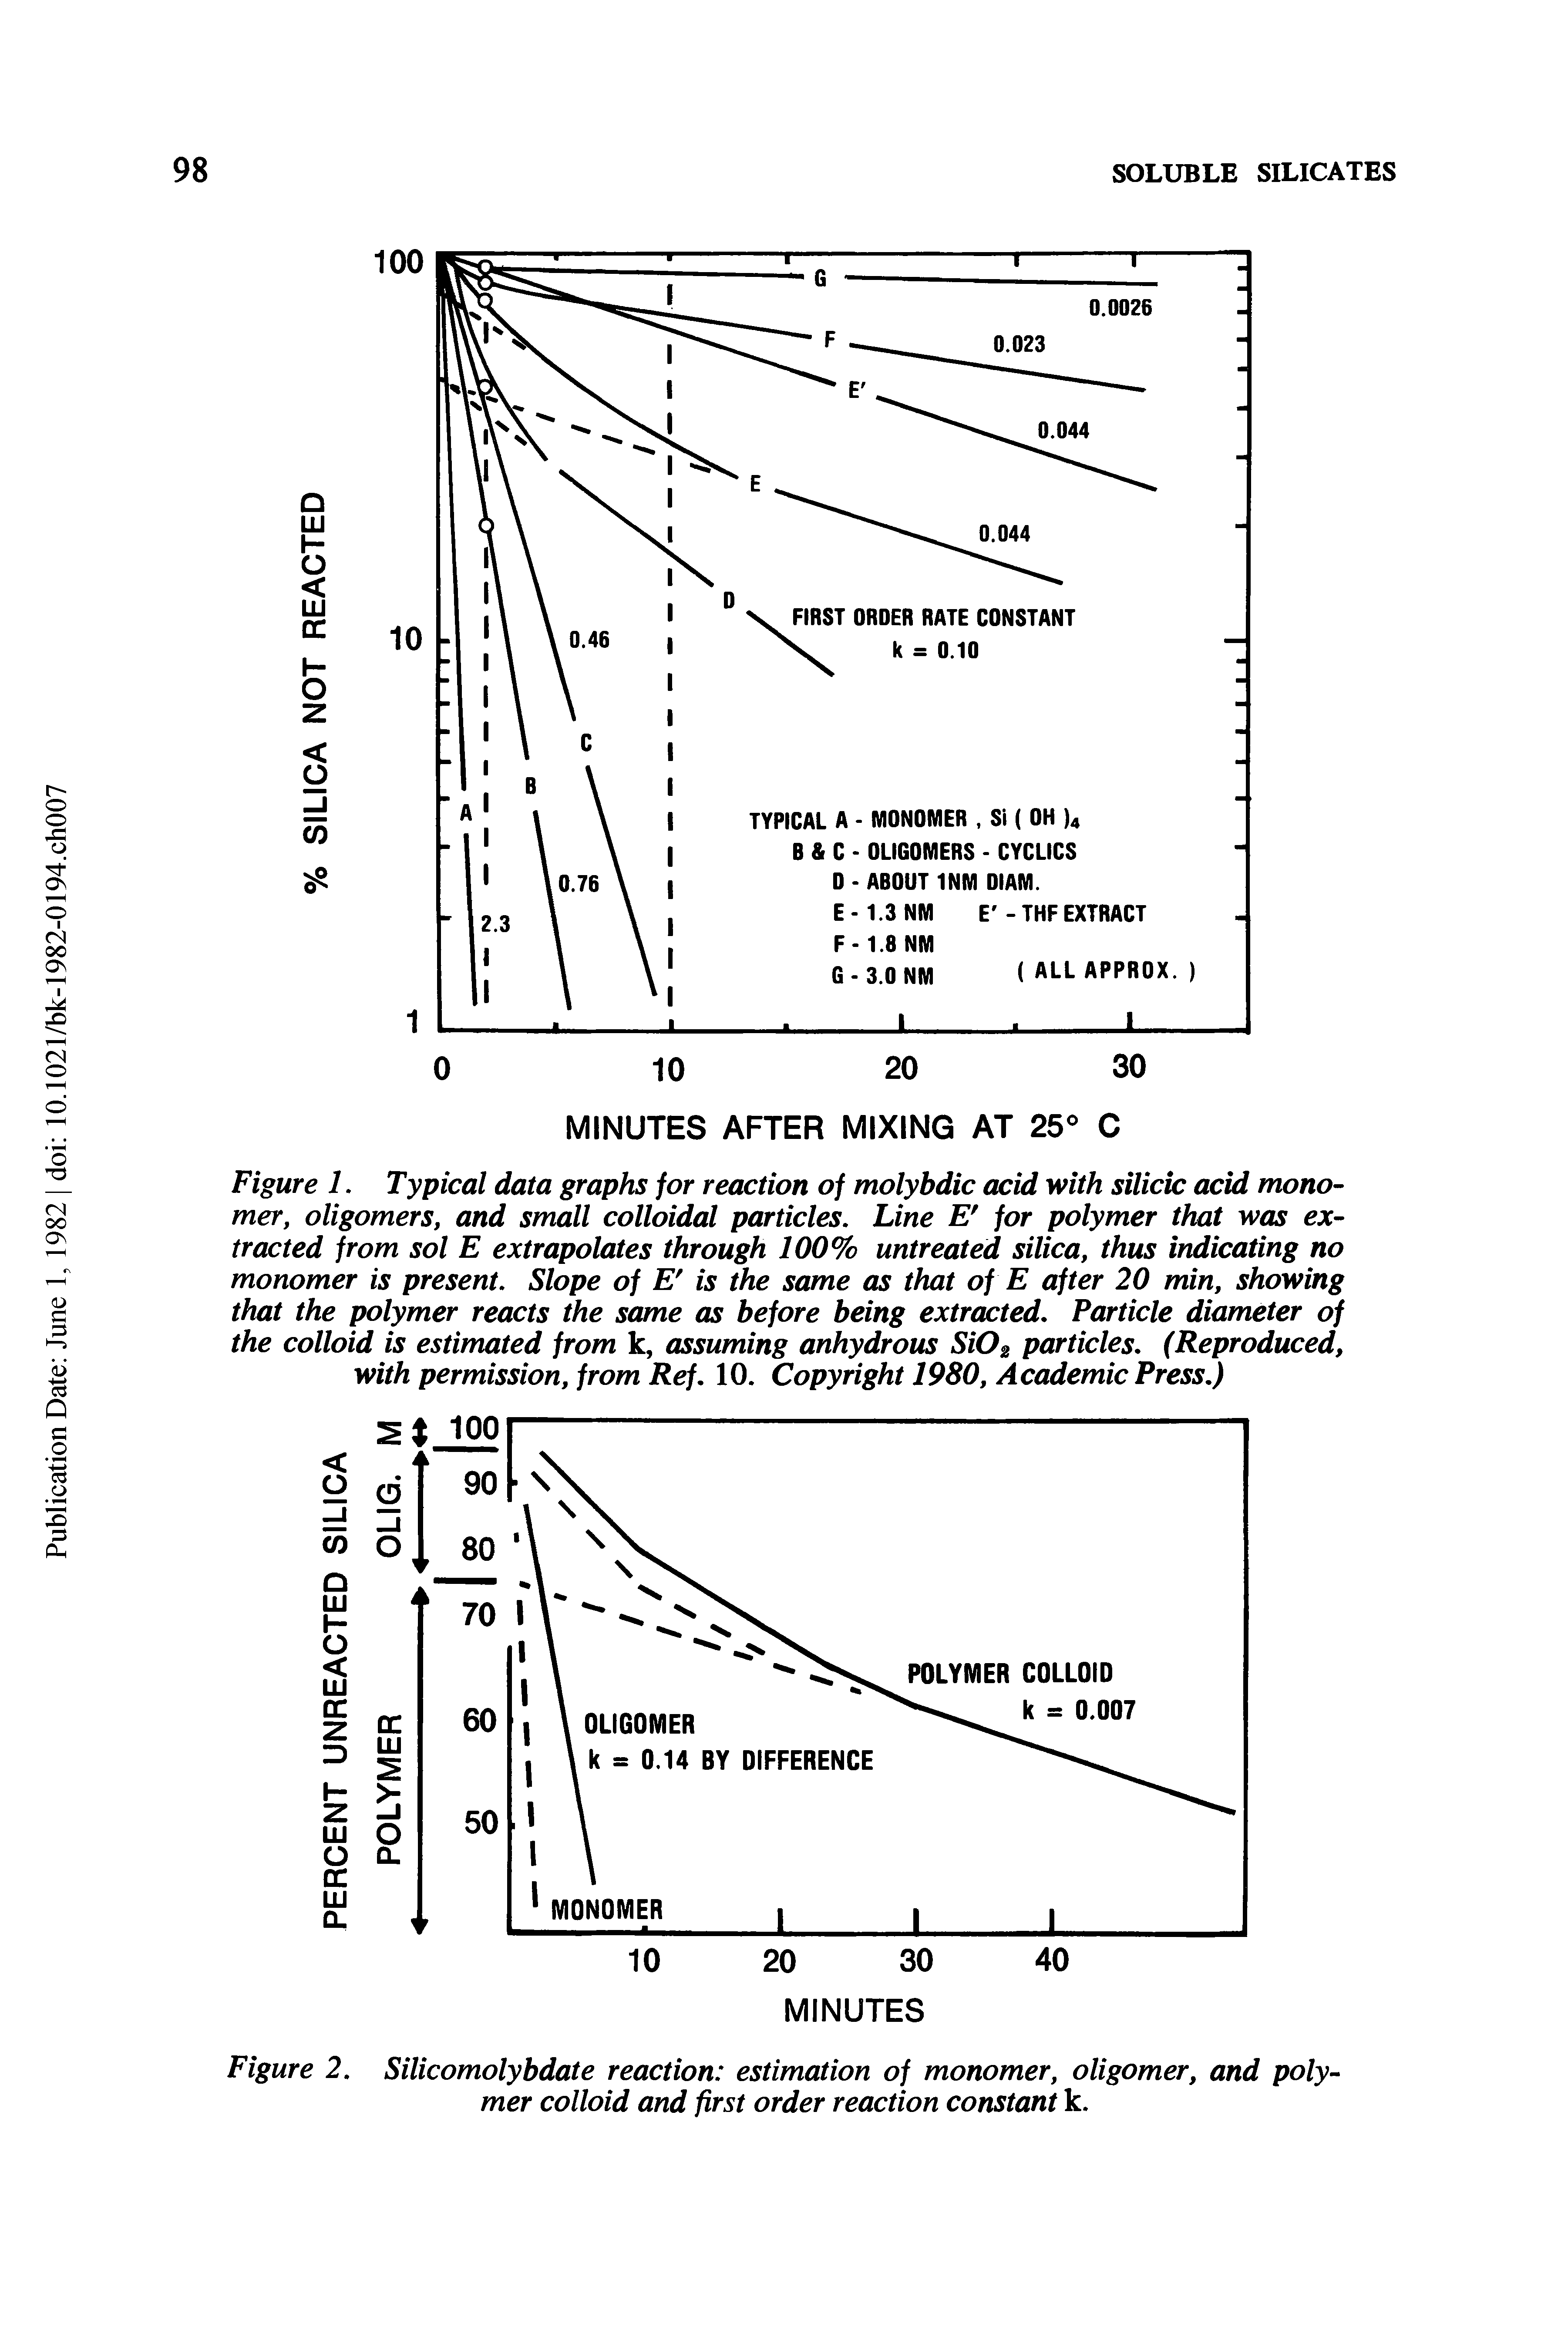 Figure 1. Typical data graphs for reaction of molybdic acid with silicic acid mono-mer, oligomers, and small colloidal particles. Line E for polymer that was extracted from sol E extrapolates through 100% untreated silica, thus indicating no monomer is present. Slope of E is the same as that of E after 20 min, showing that the polymer reacts the same as before being extracted. Particle diameter of the colloid is estimated from k, assuming anhydrous Si02 particles. (Reproduced, with permission, from Ref. 10. Copyright 1980, Academic Press.)...